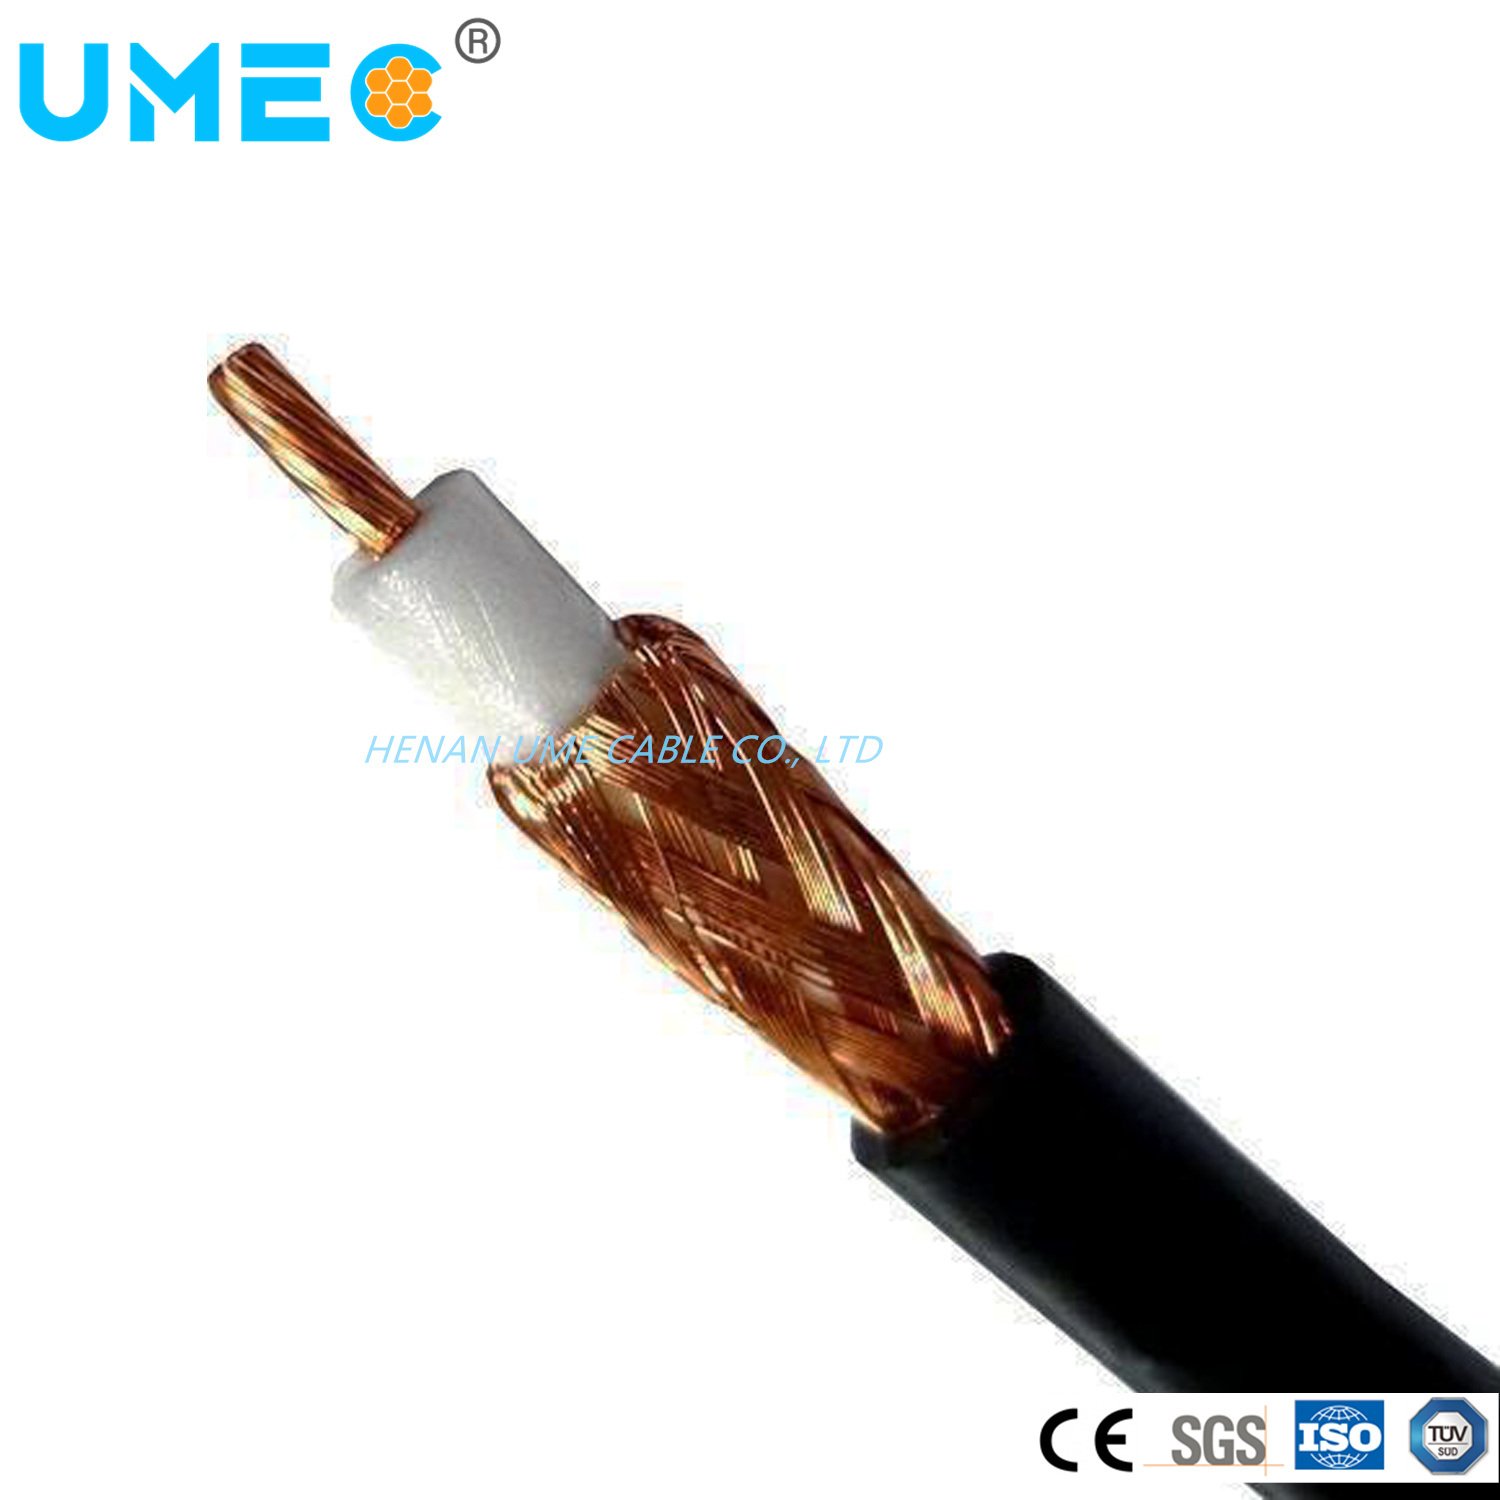 RF Coaxial Cable 1/2, 7/8 Low Loss Cable RF 7/8 Feeder Cable Electrical Cable Wire